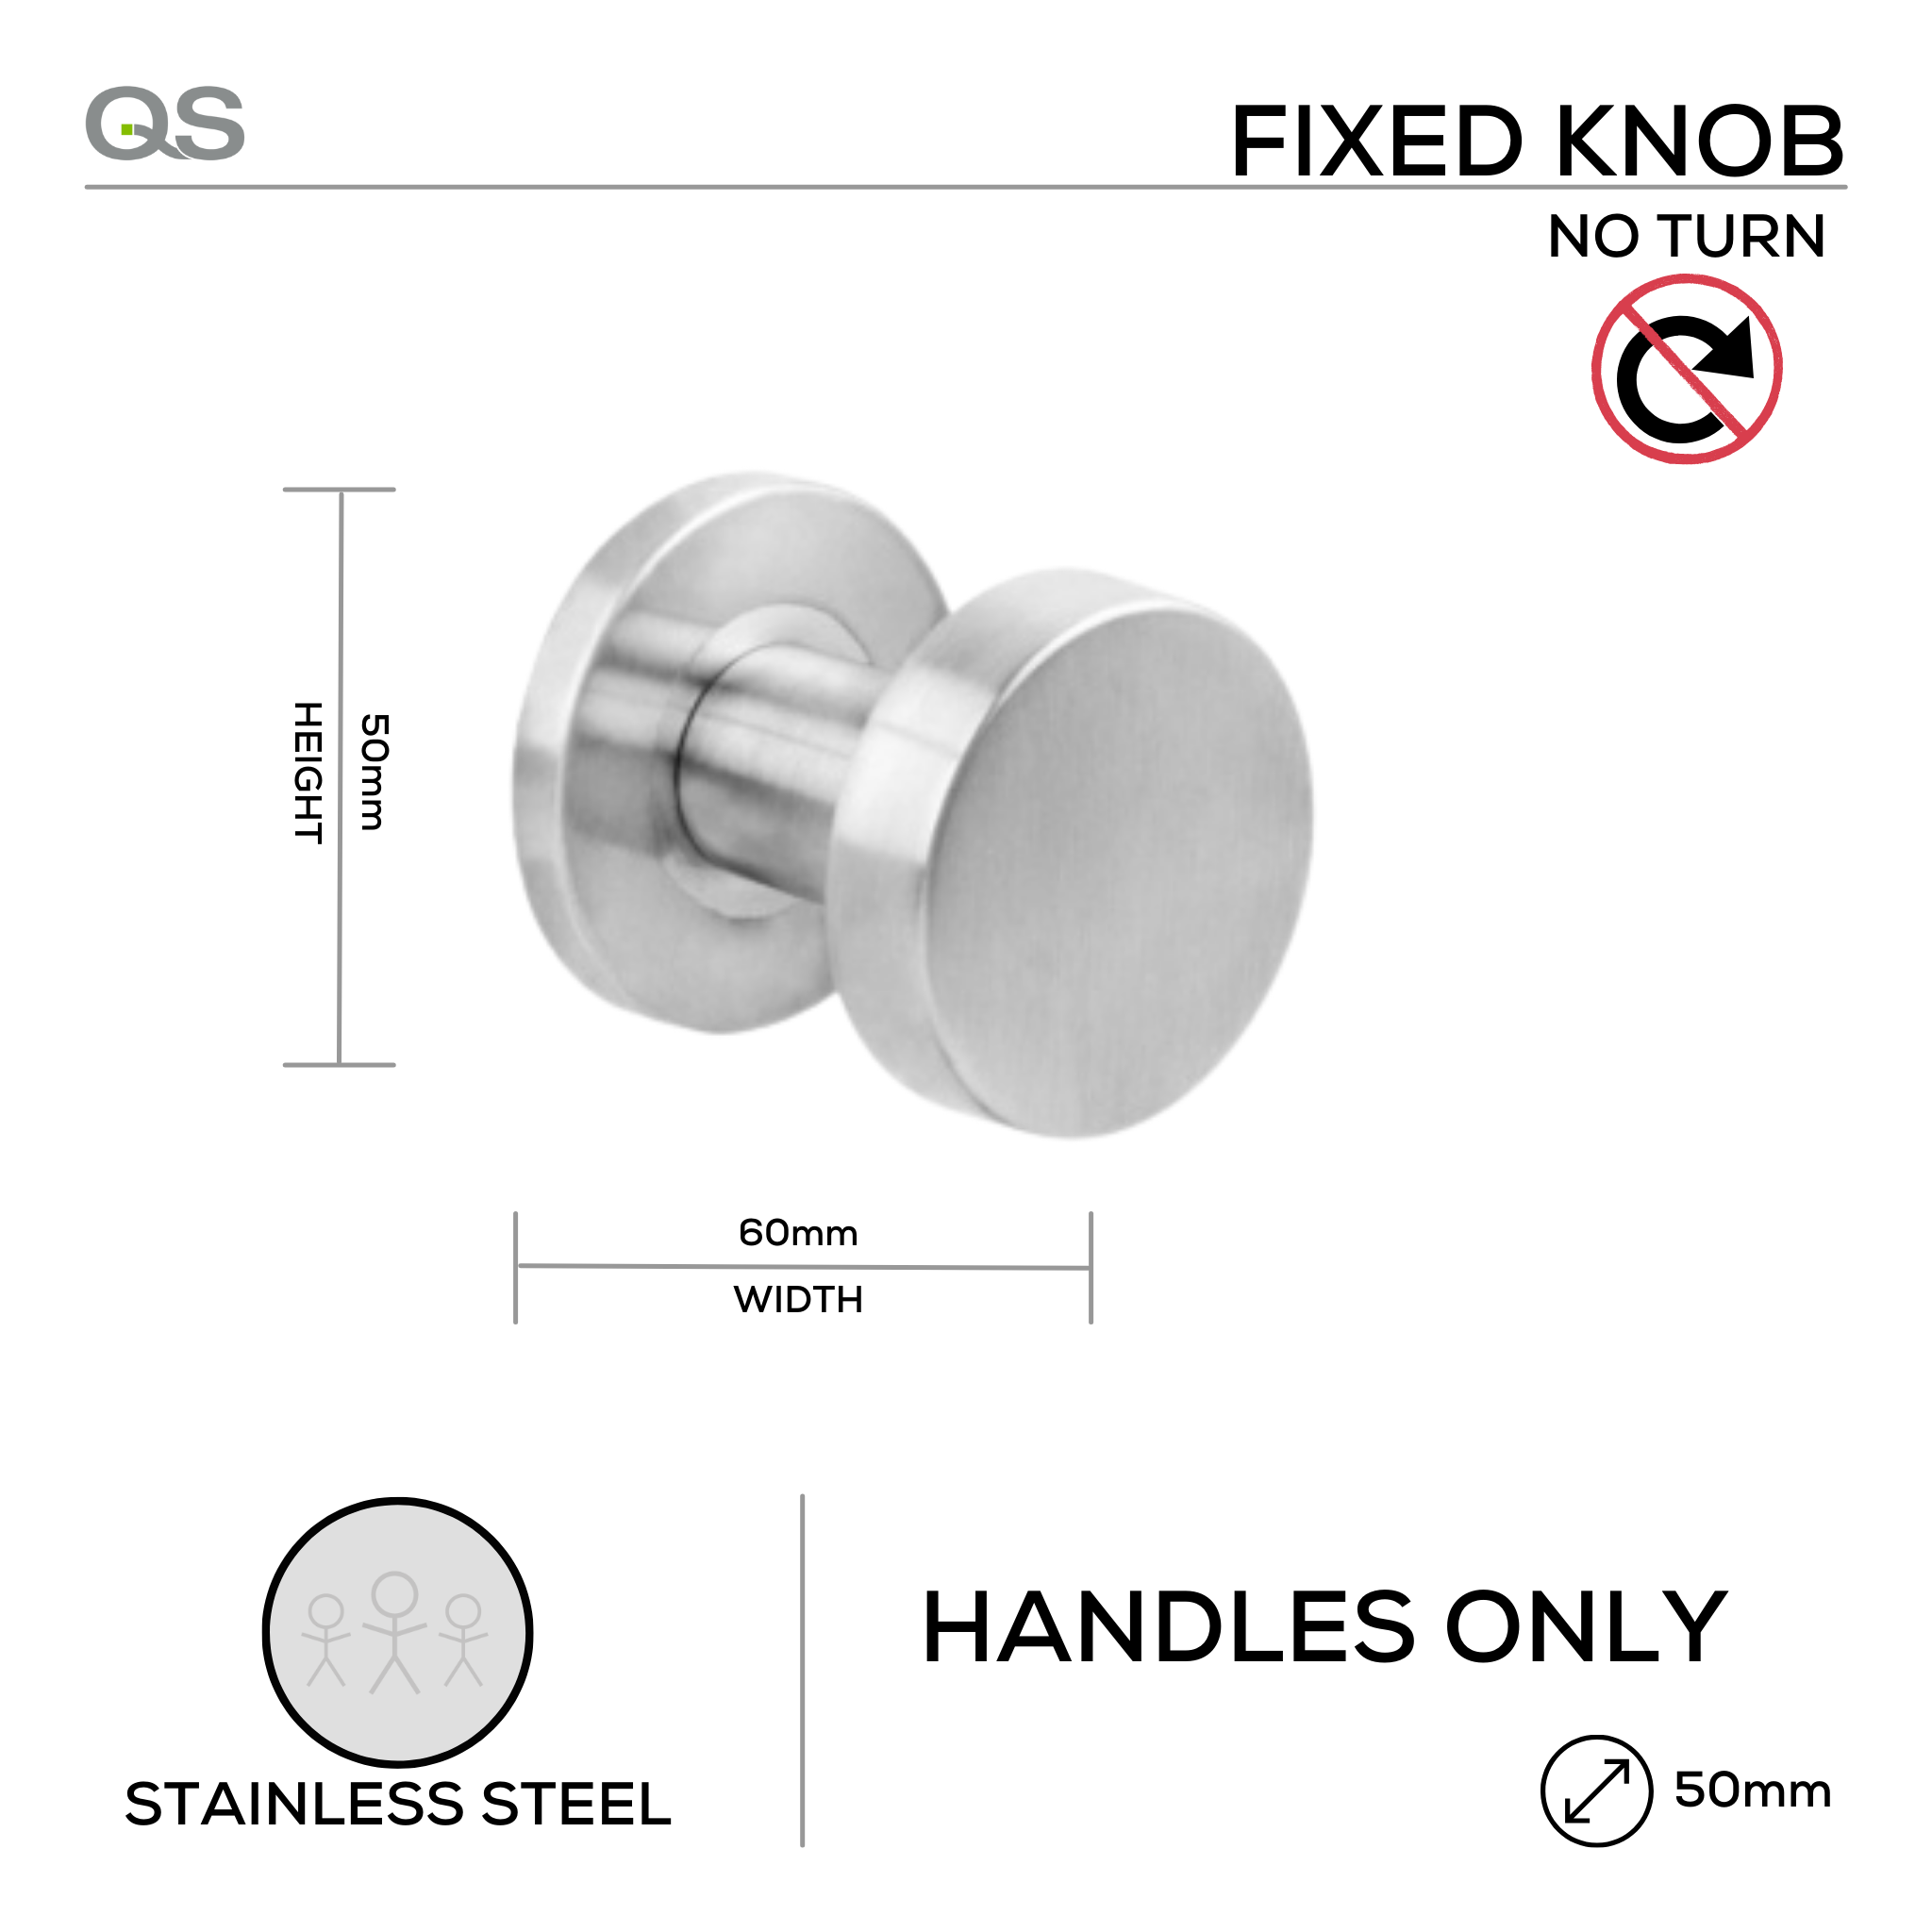 QS3805, Knob Handle, Fixed Round Flat, Stainless Steel, QS